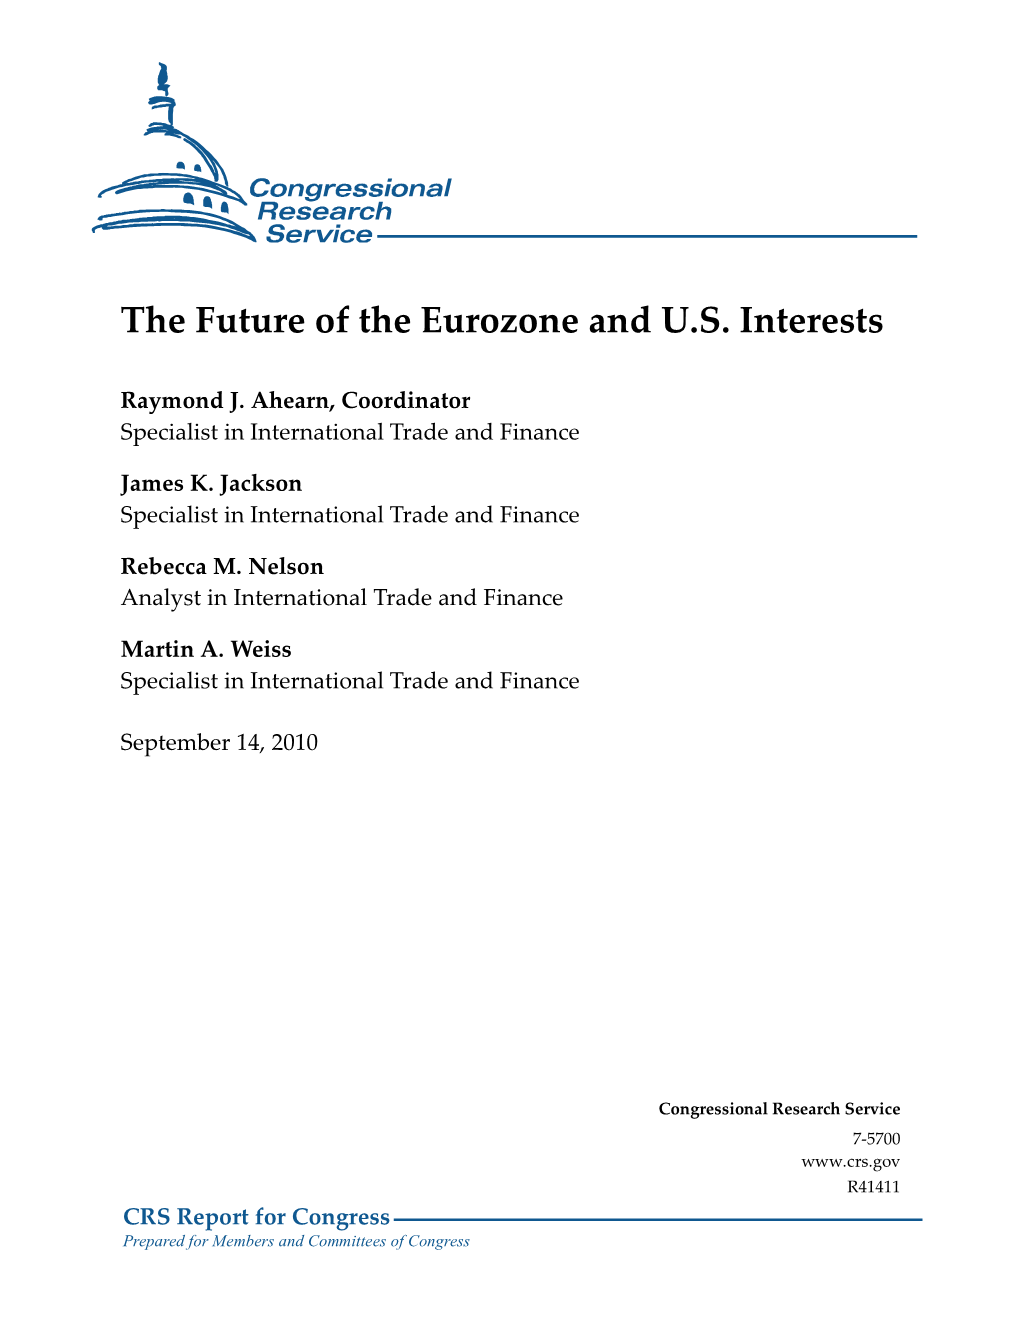 The Future of the Eurozone and U.S. Interests